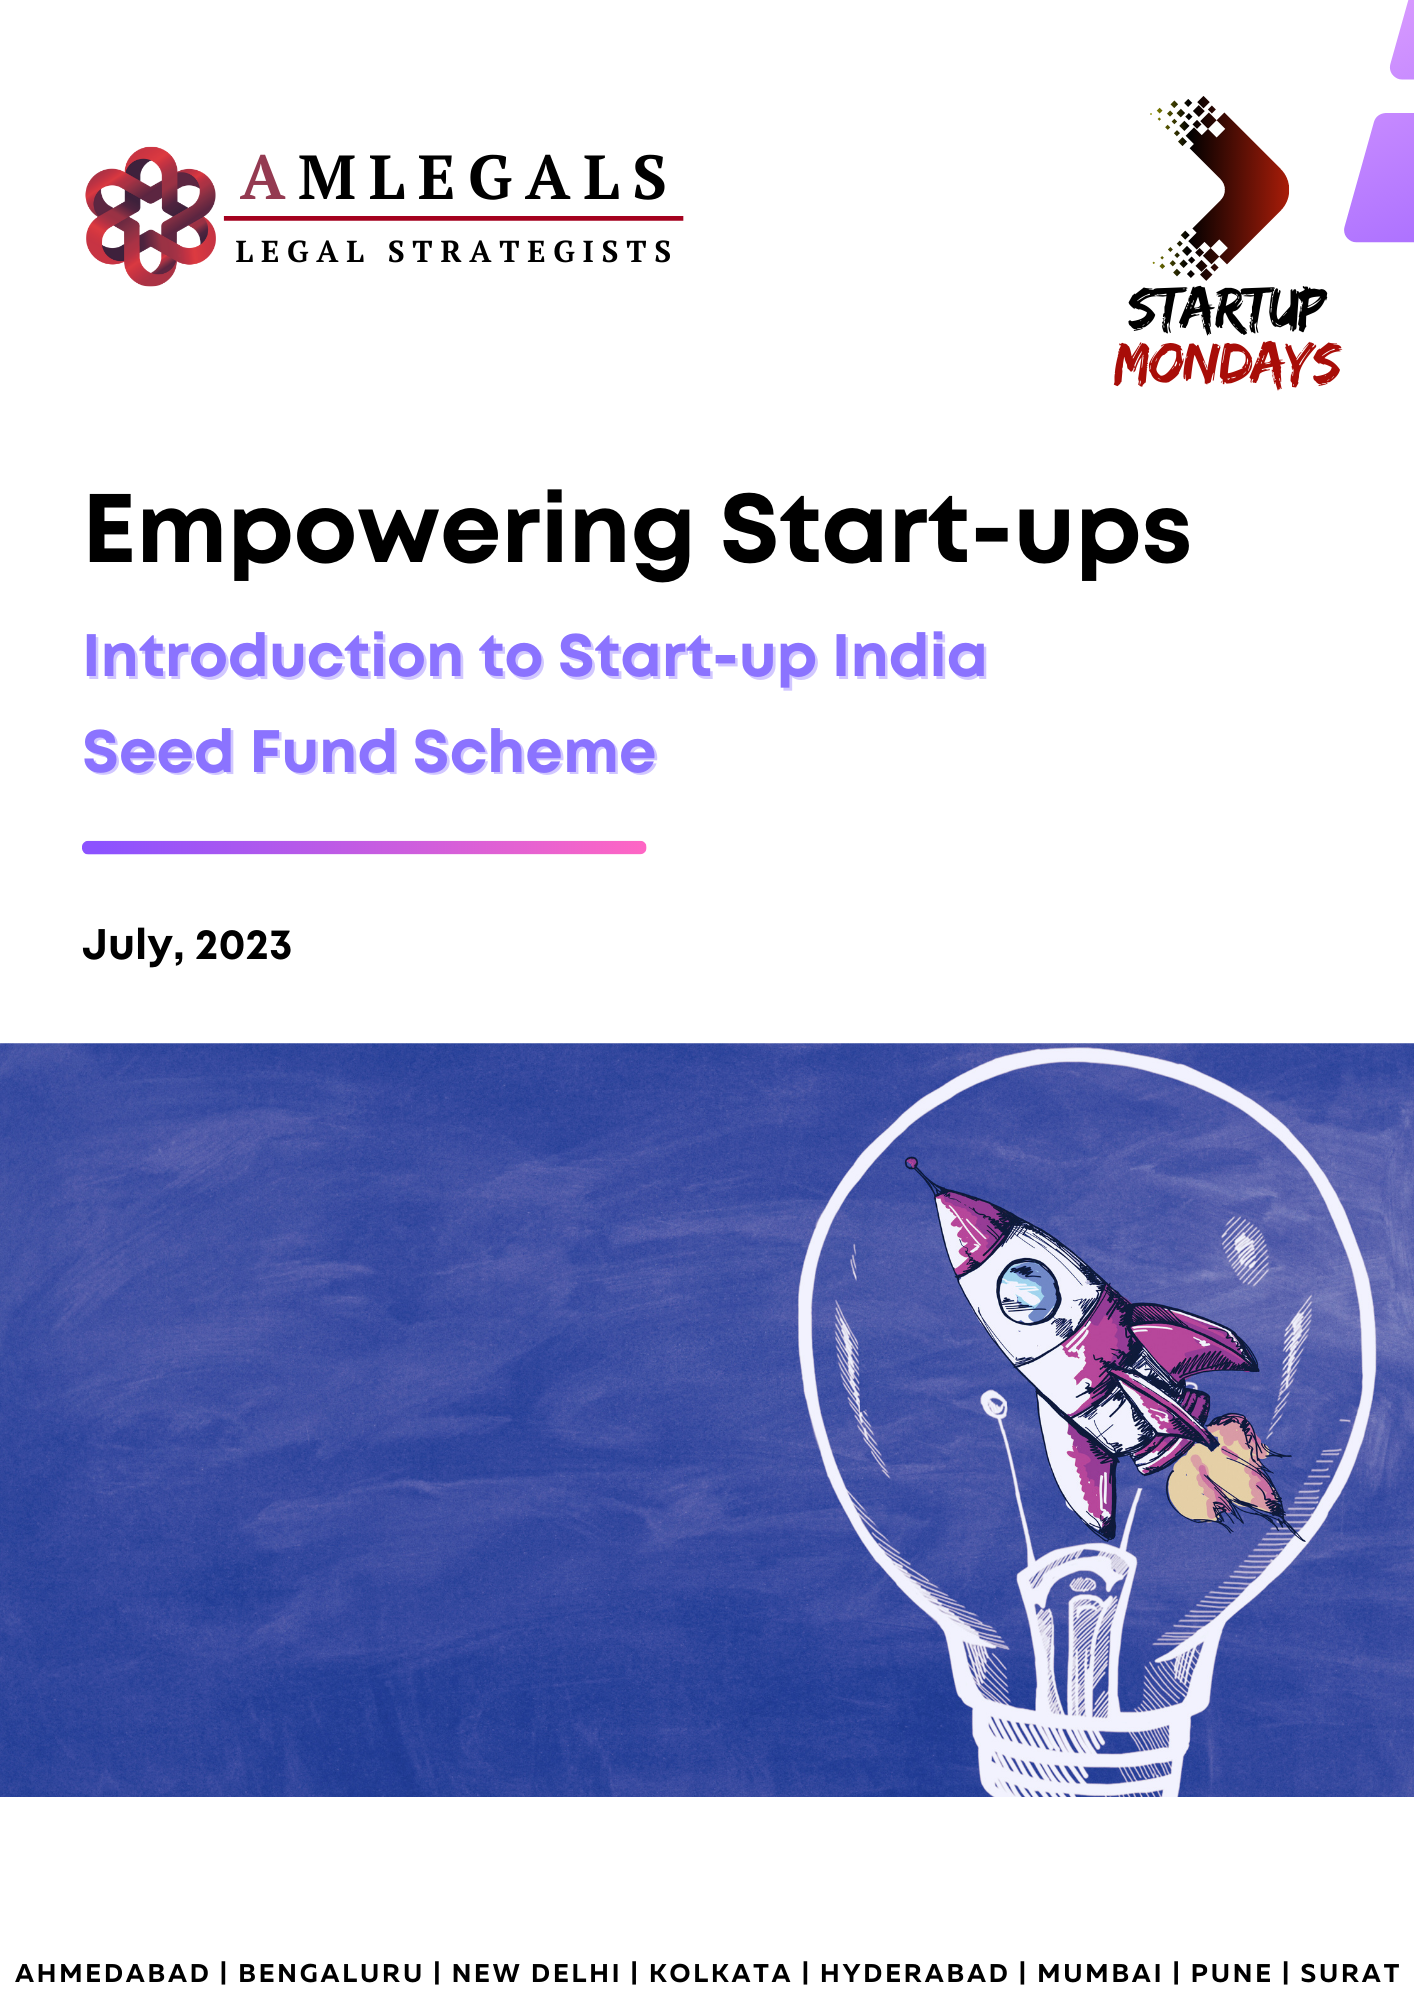 Introduction to Startup India Seed Fund Scheme